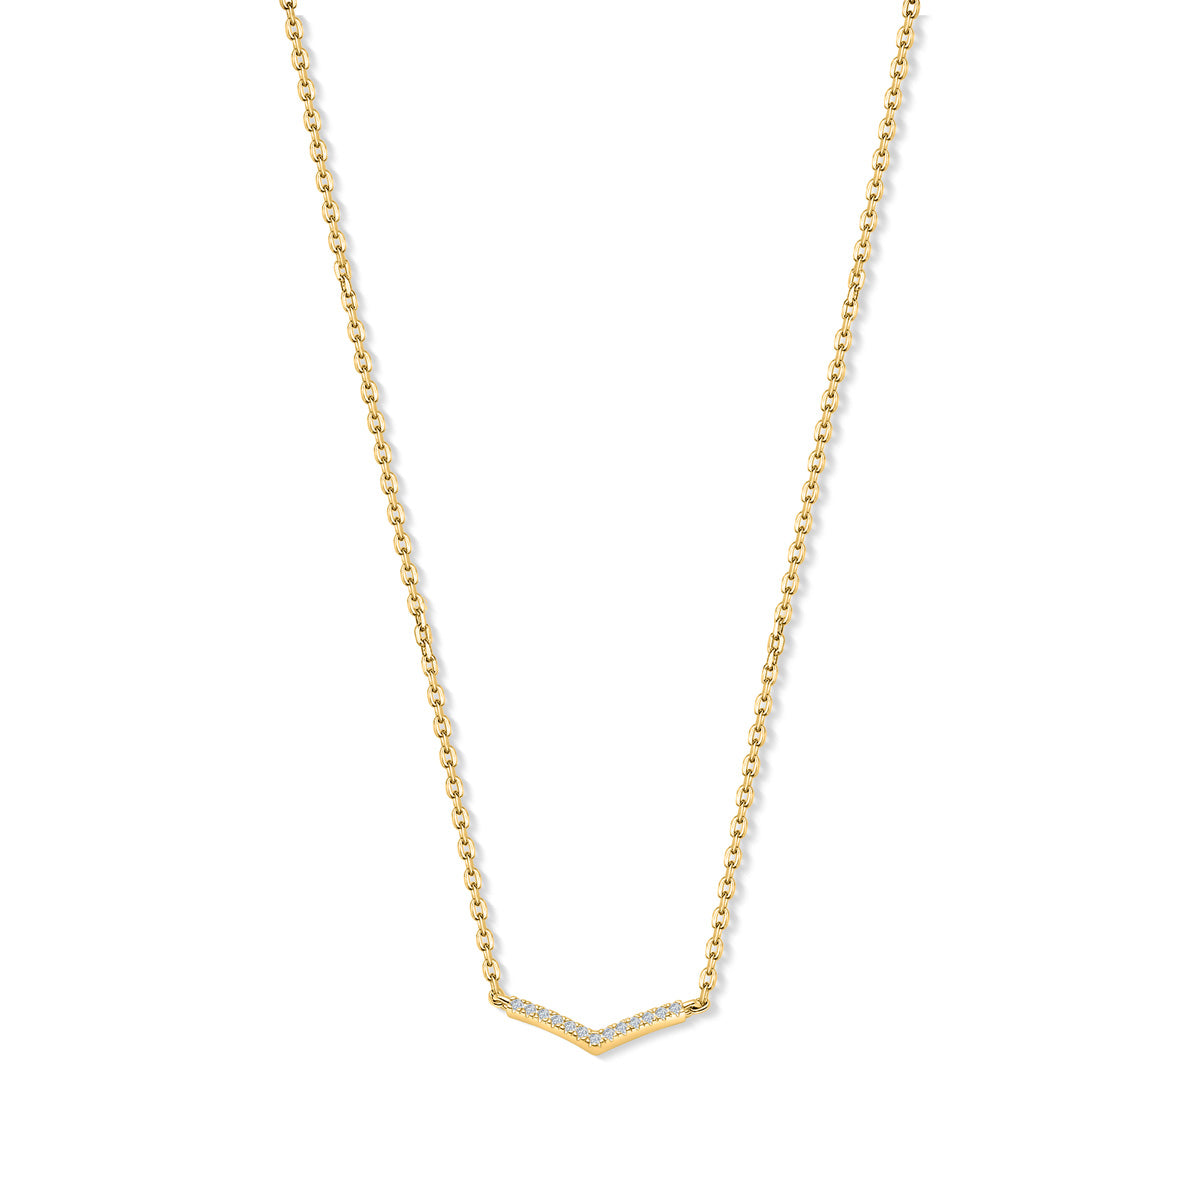 Gold v shaped necklace with stones